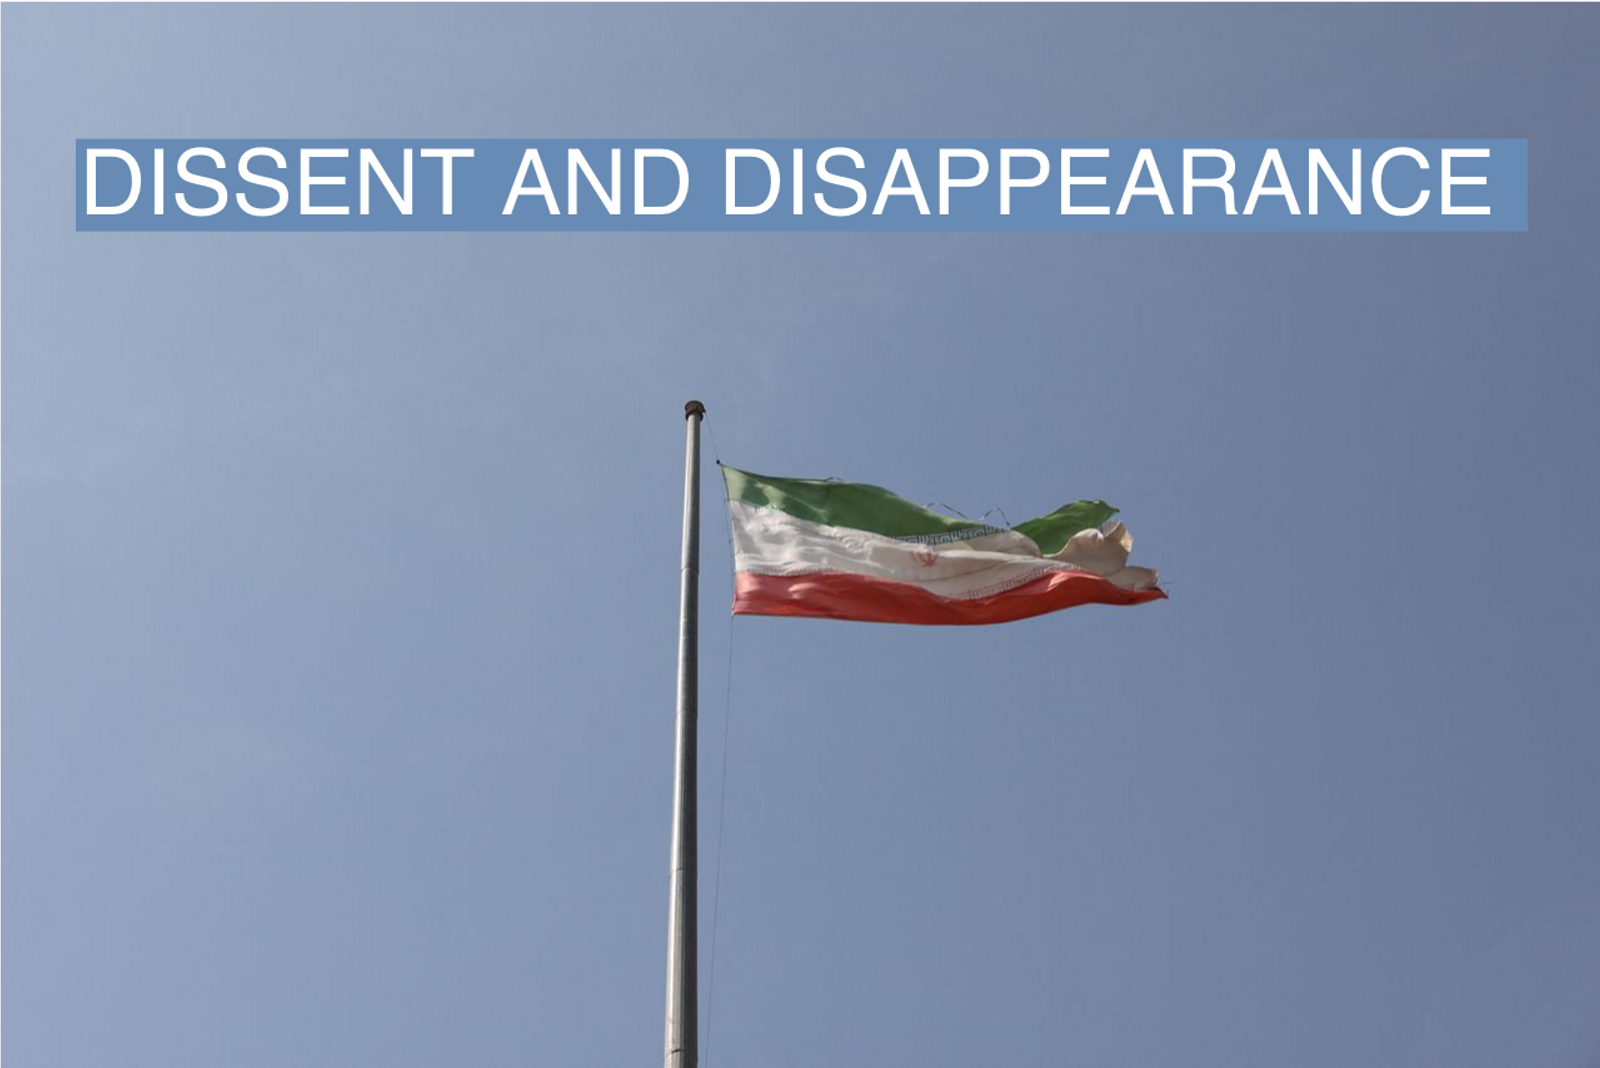 The Iranian flag is seen flying over Evin prison in Tehran